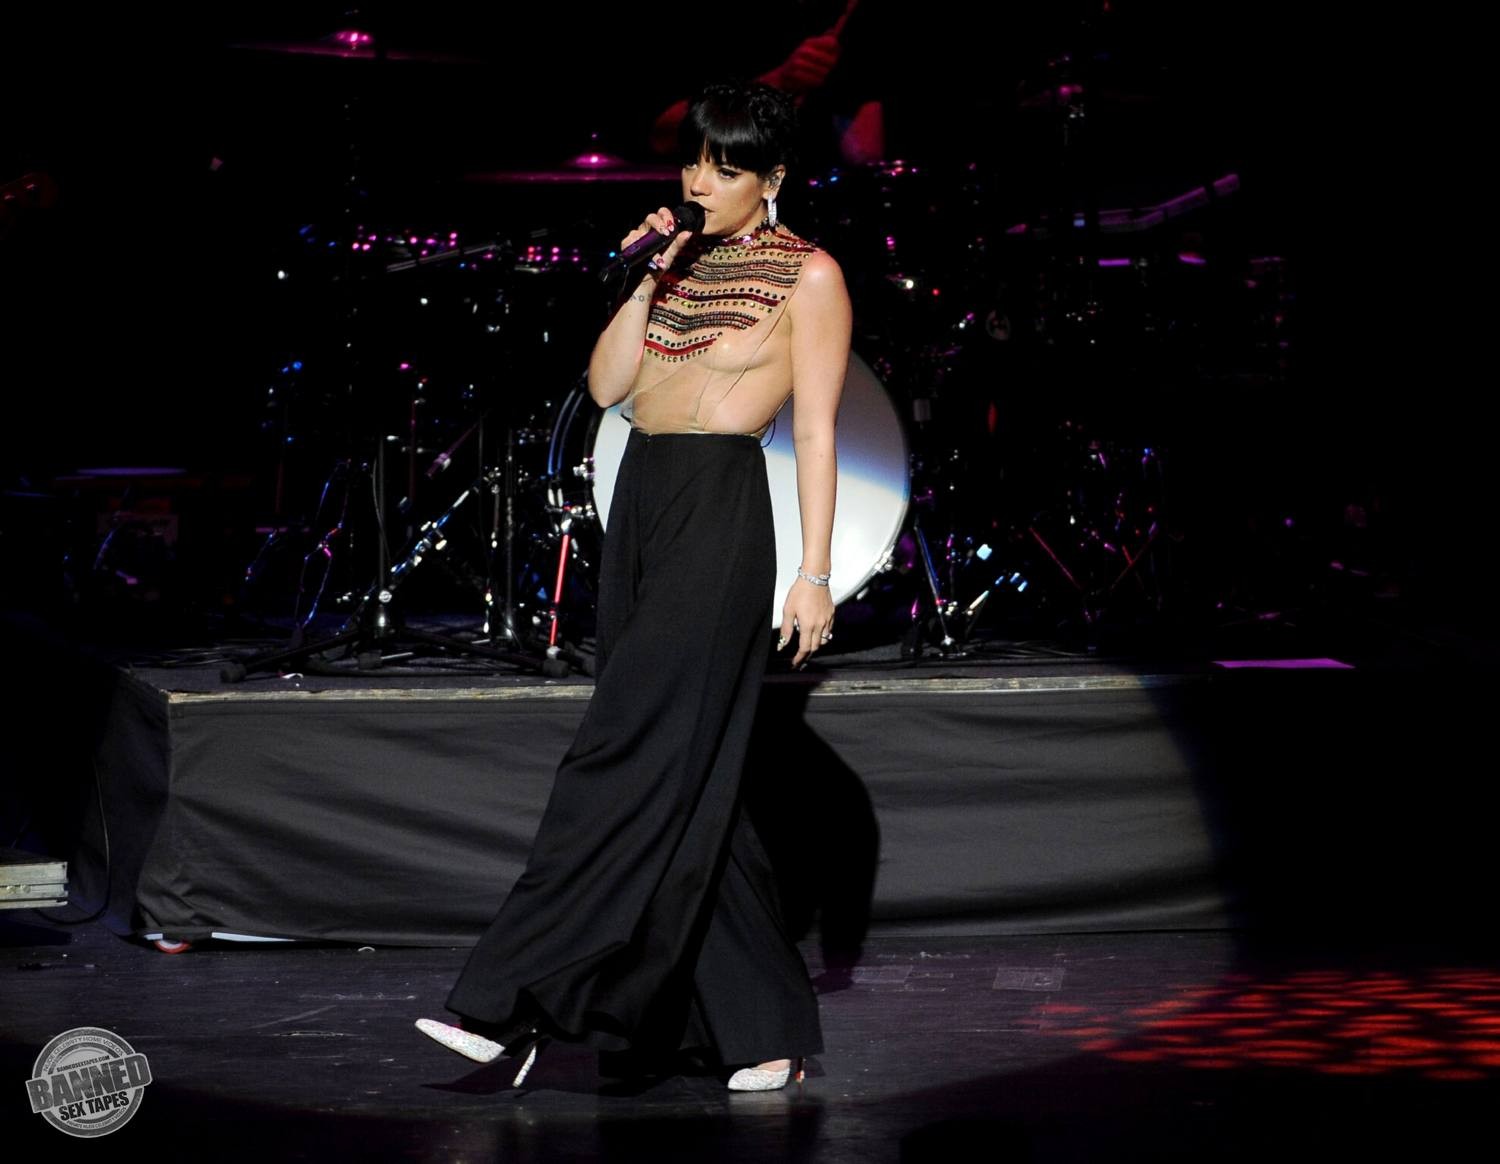 Lily Allen  see her nude tits through transparent top during concert #75191538